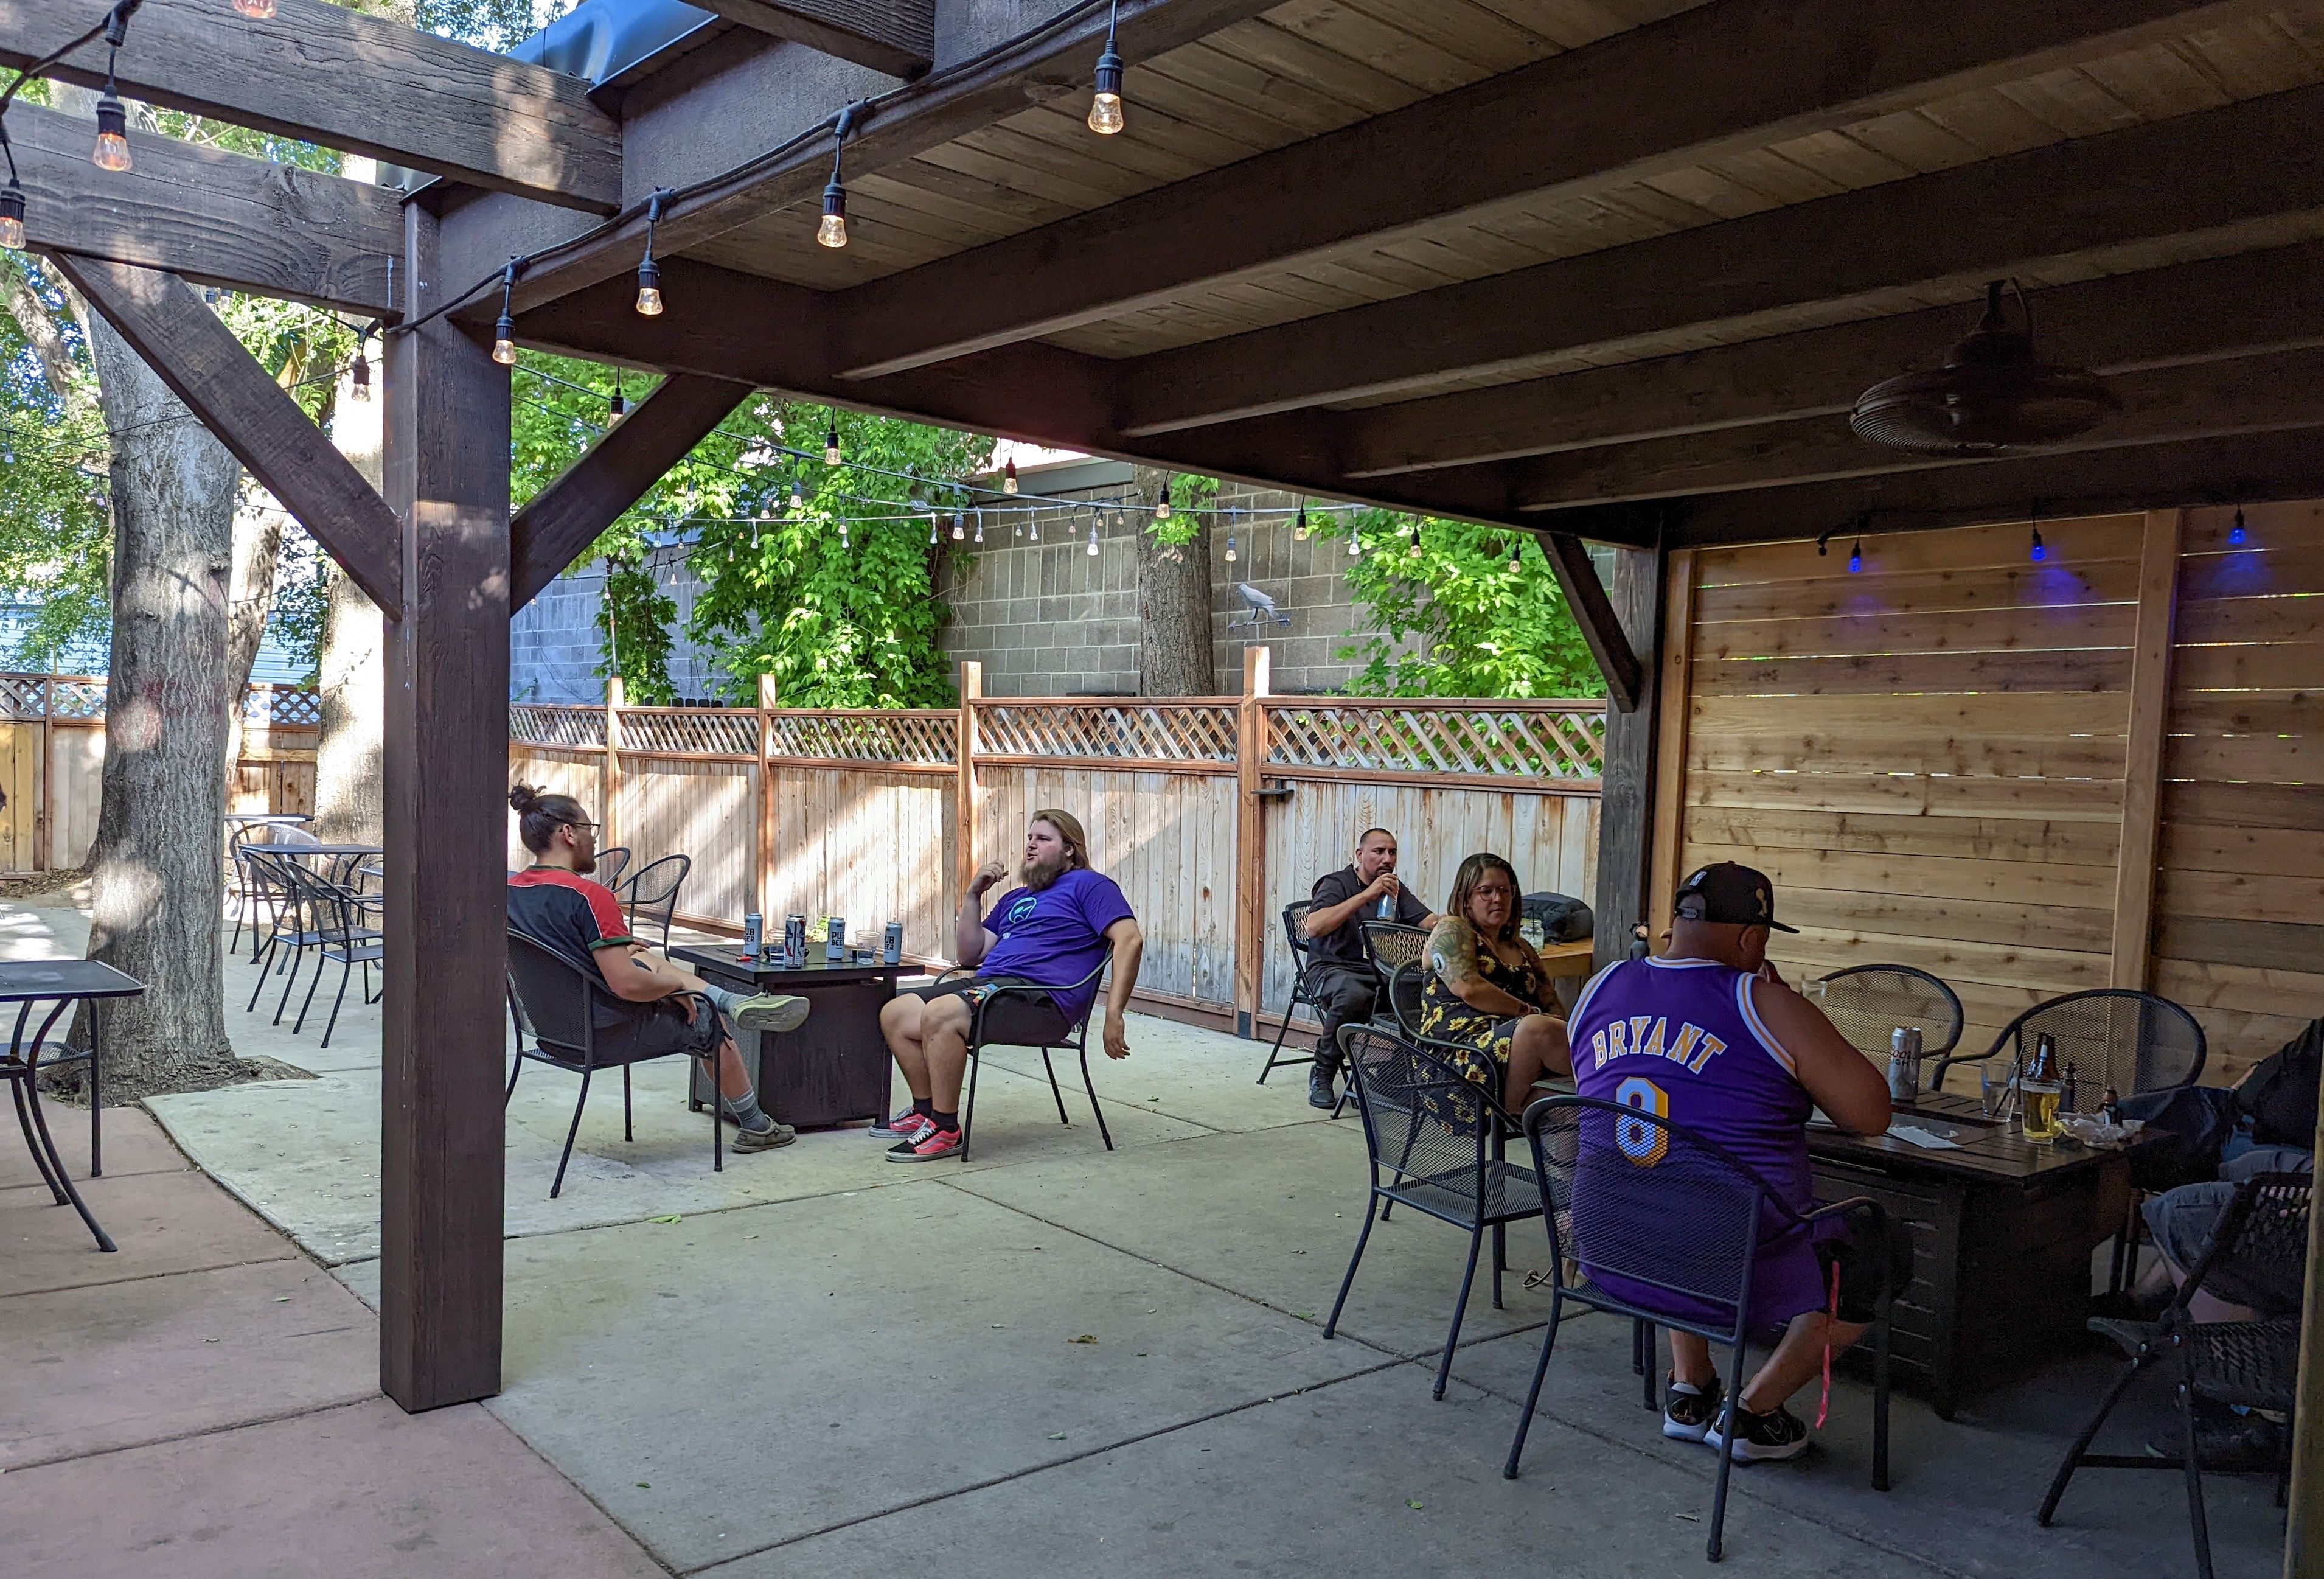 Patrons drink and chat under the porch roof and trees at the Crow and the Pitcher in Murray.